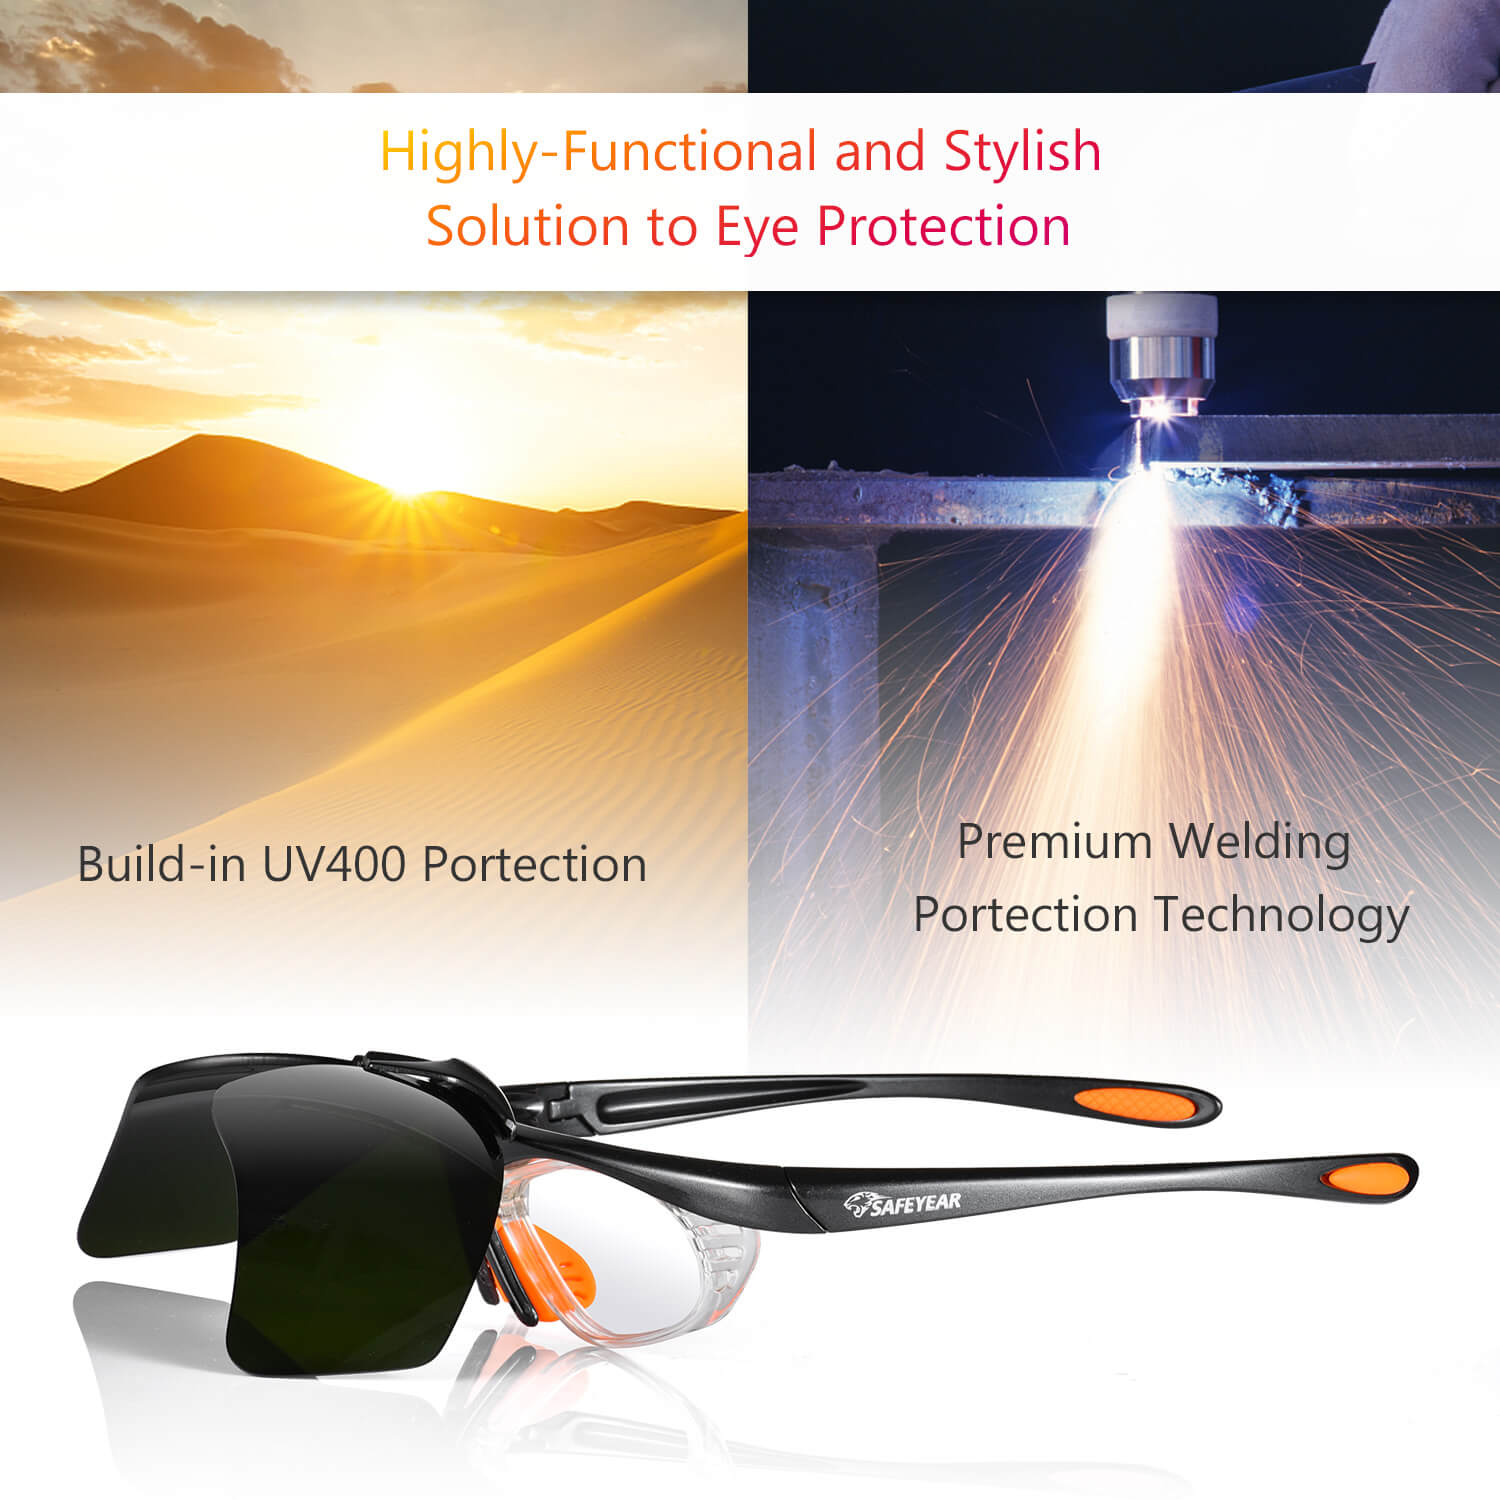 Safeyear Welding Safety Work Glasses with Anti Scratch Dark Lens UV Protection